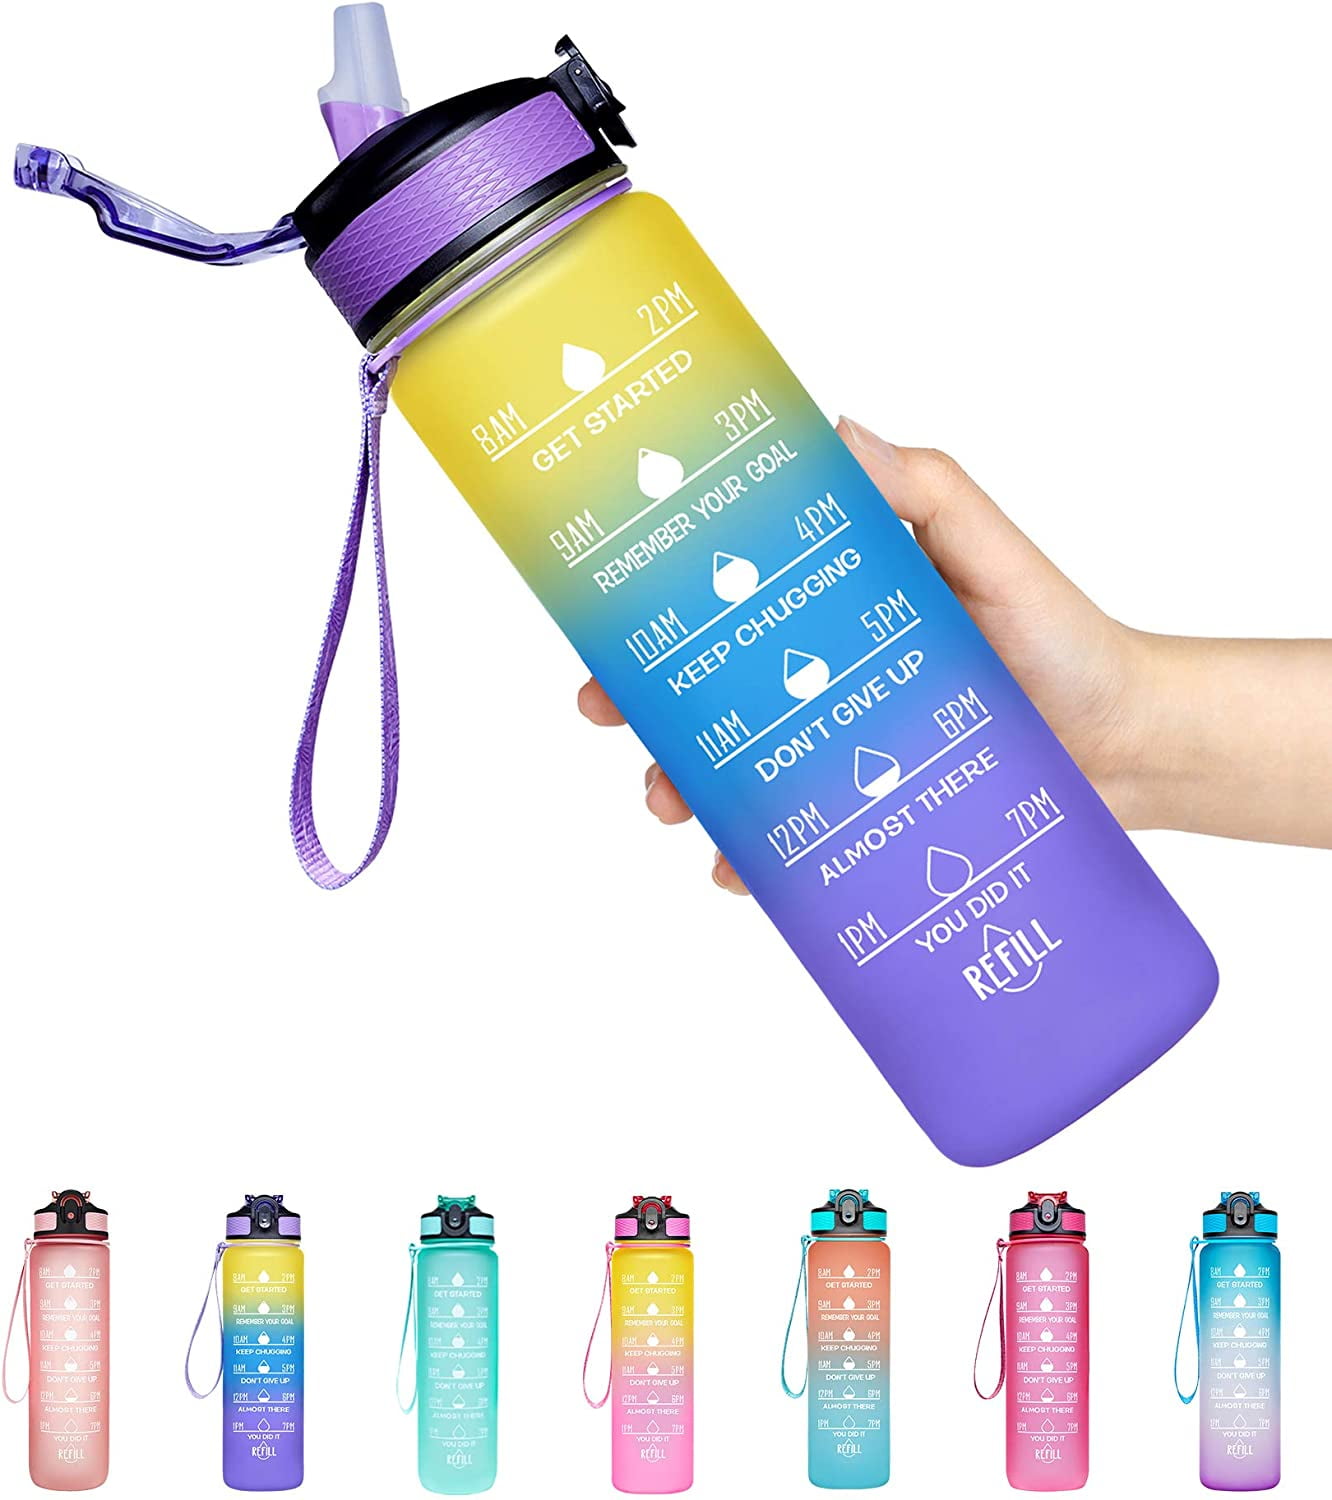 SDJMa Water Bottle With Times To Drink - 3.7L Water Bottle With Straw -  Water Jug - Motivational Water Bottle - Large Water Bottle - Sports Water